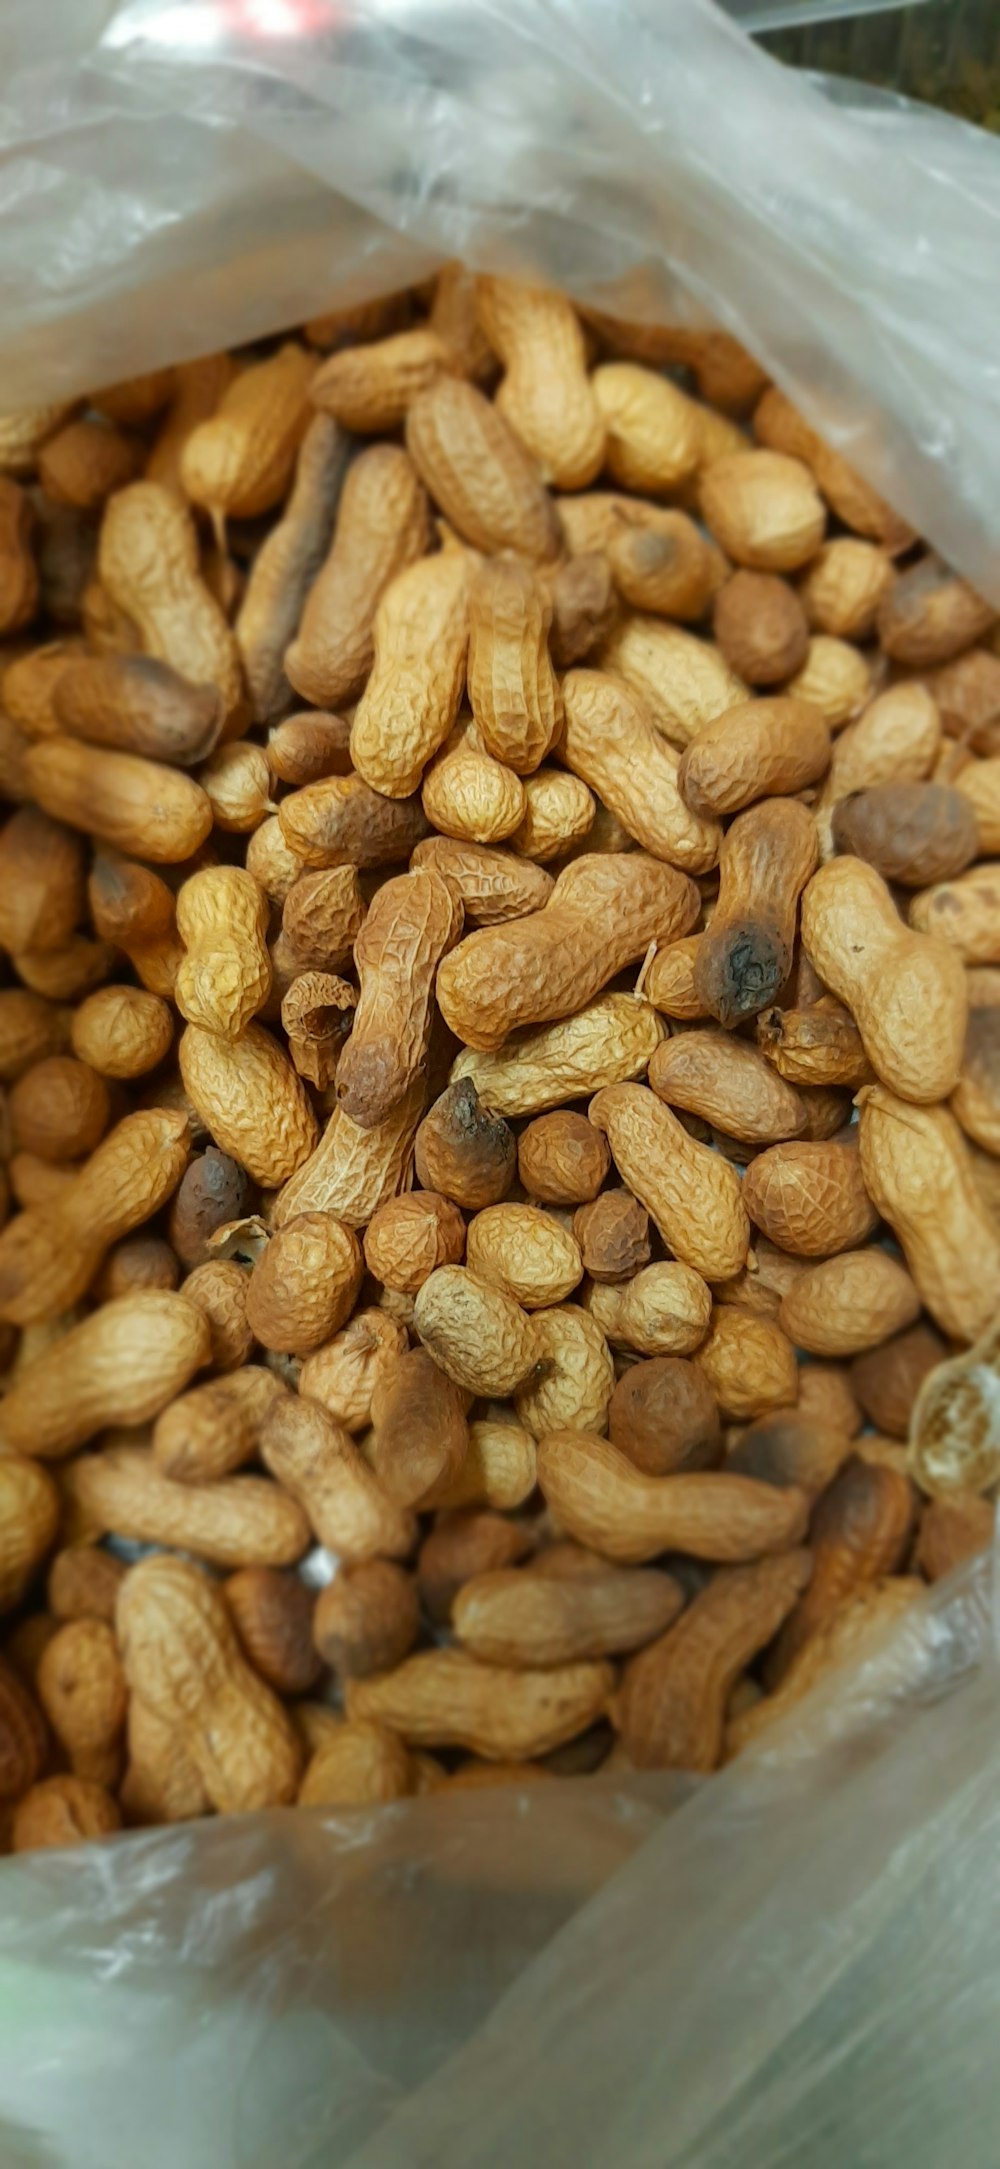 peanuts in clear plastic pack